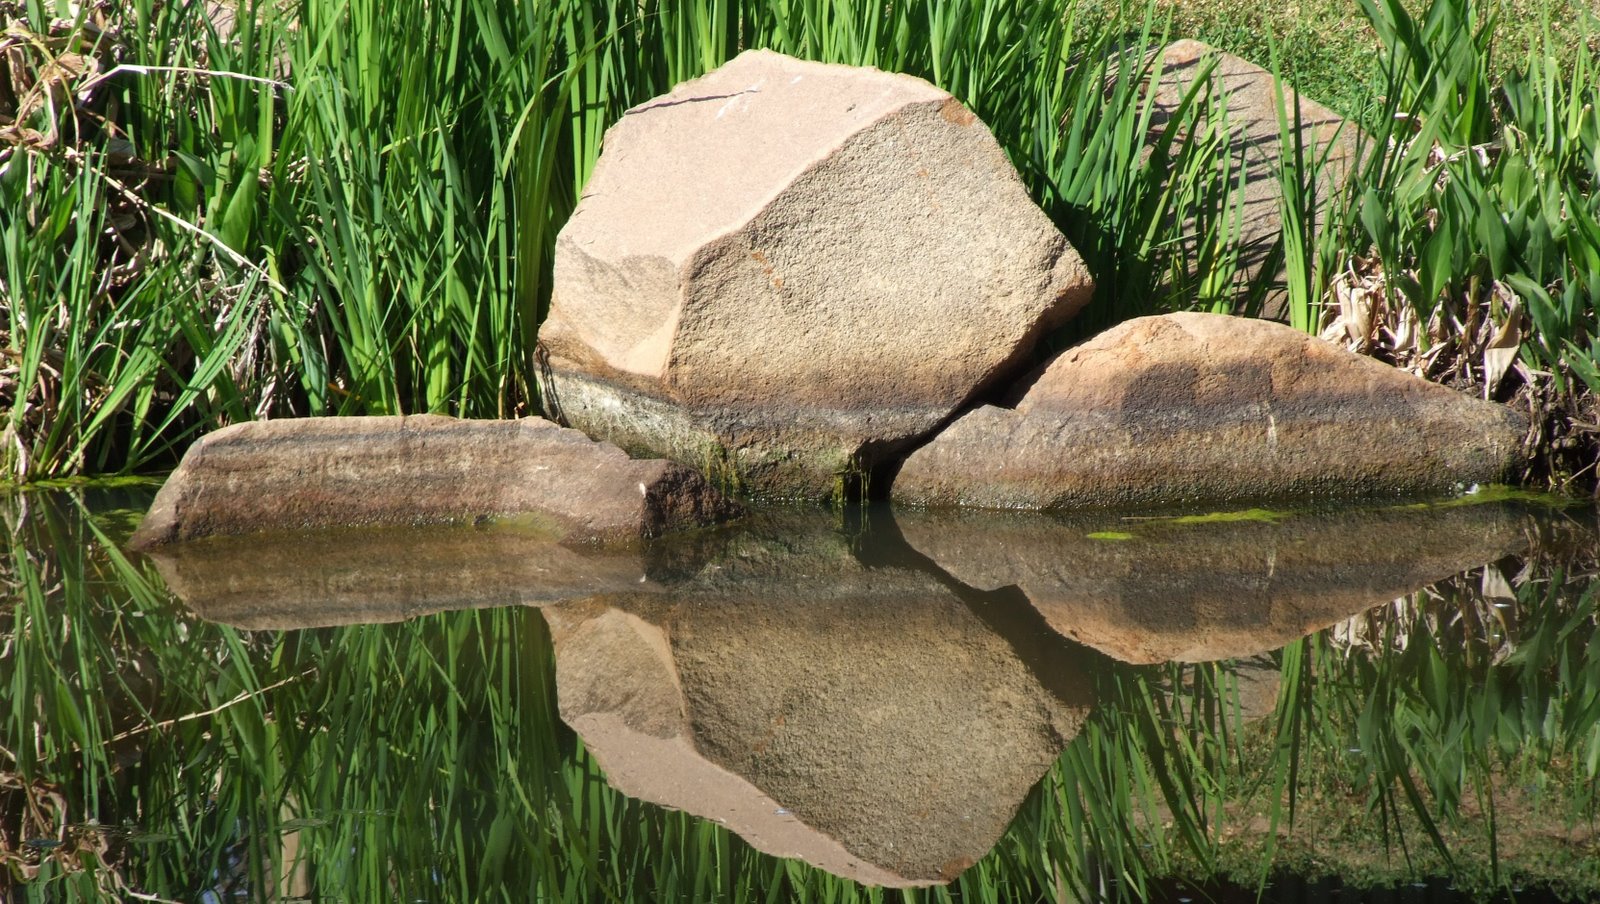 stones / rocks with a reflection in the water - restful waters with reflection